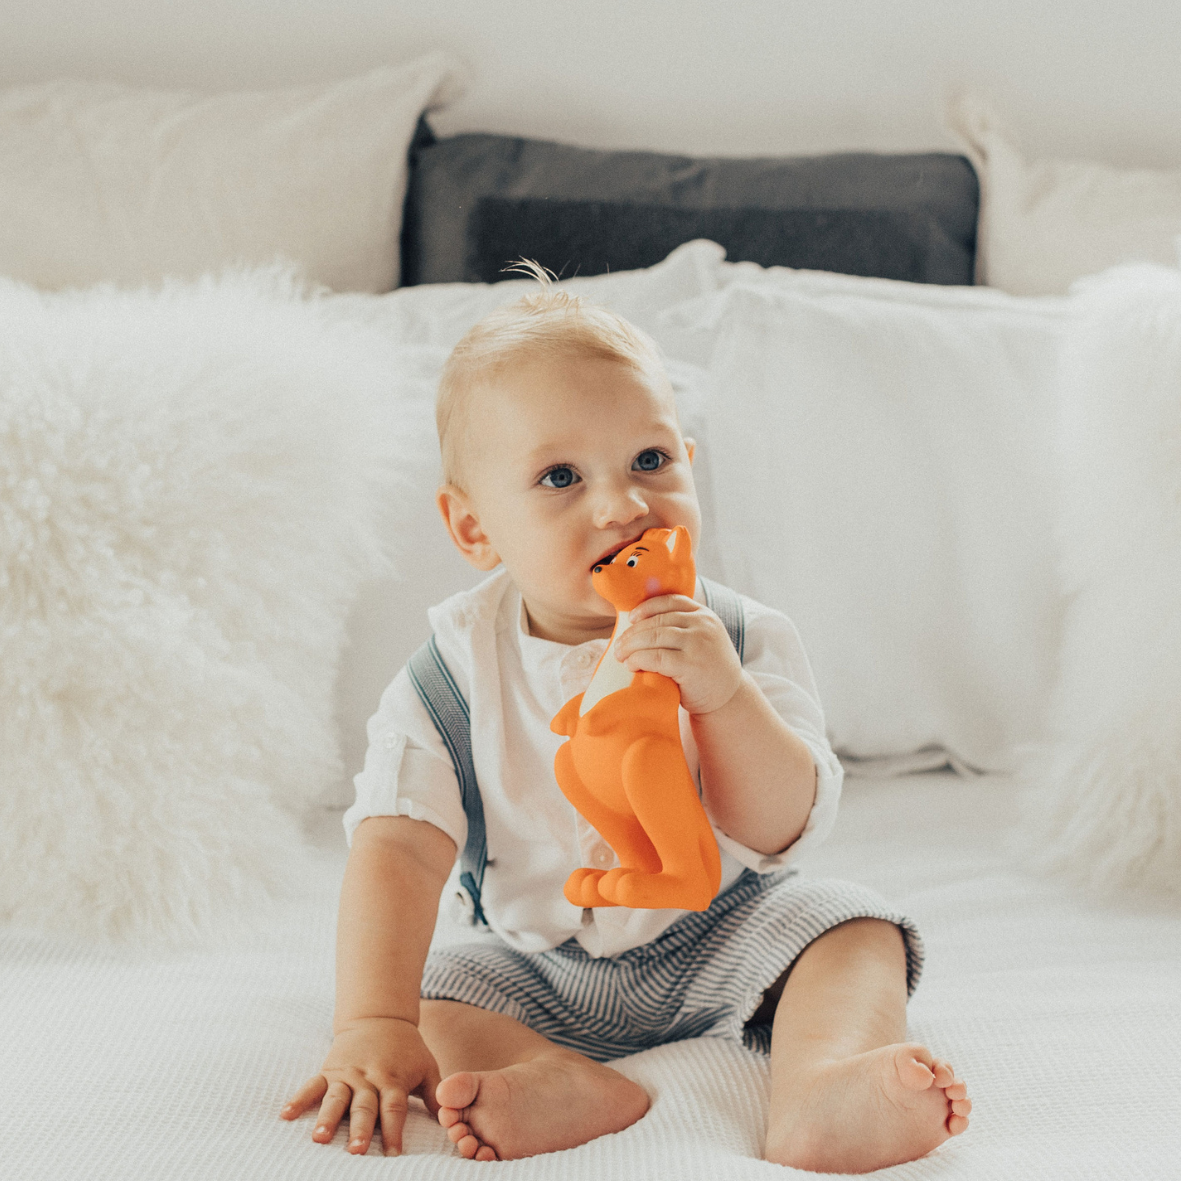 Teething Toys: What You Should Look For